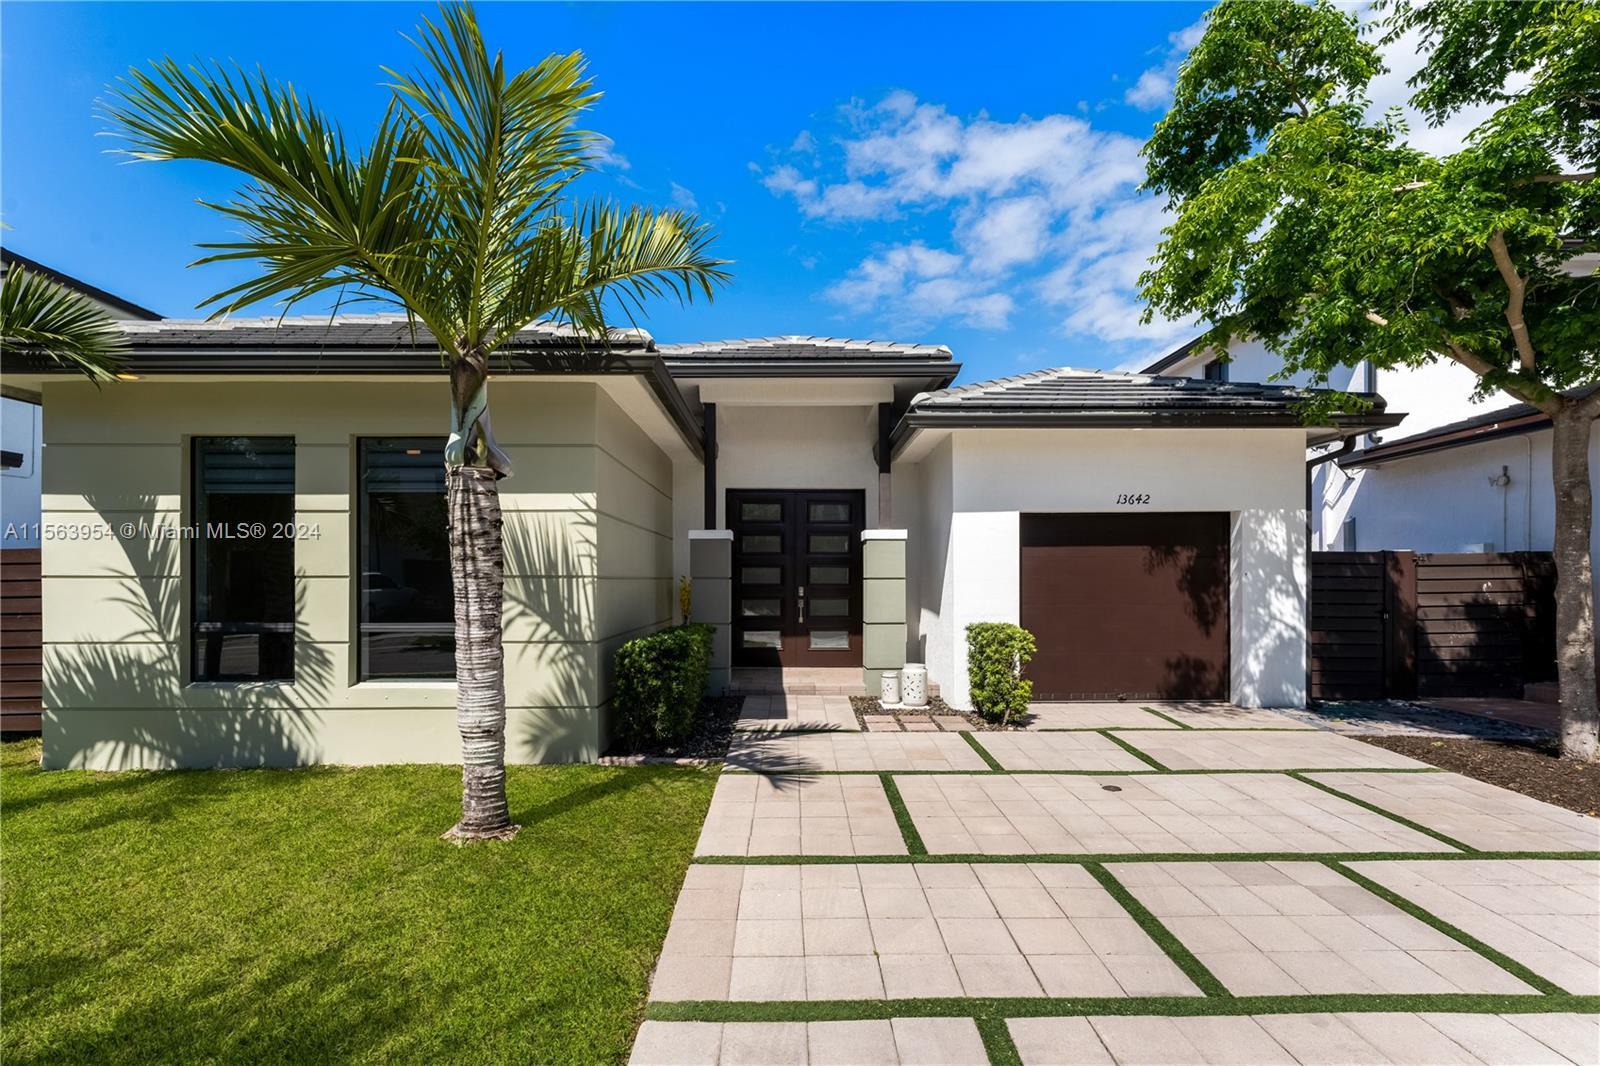 Welcome to this 3bd 2.5ba single story home at Serenity by Lennar near Miami Executive Airport. Newl